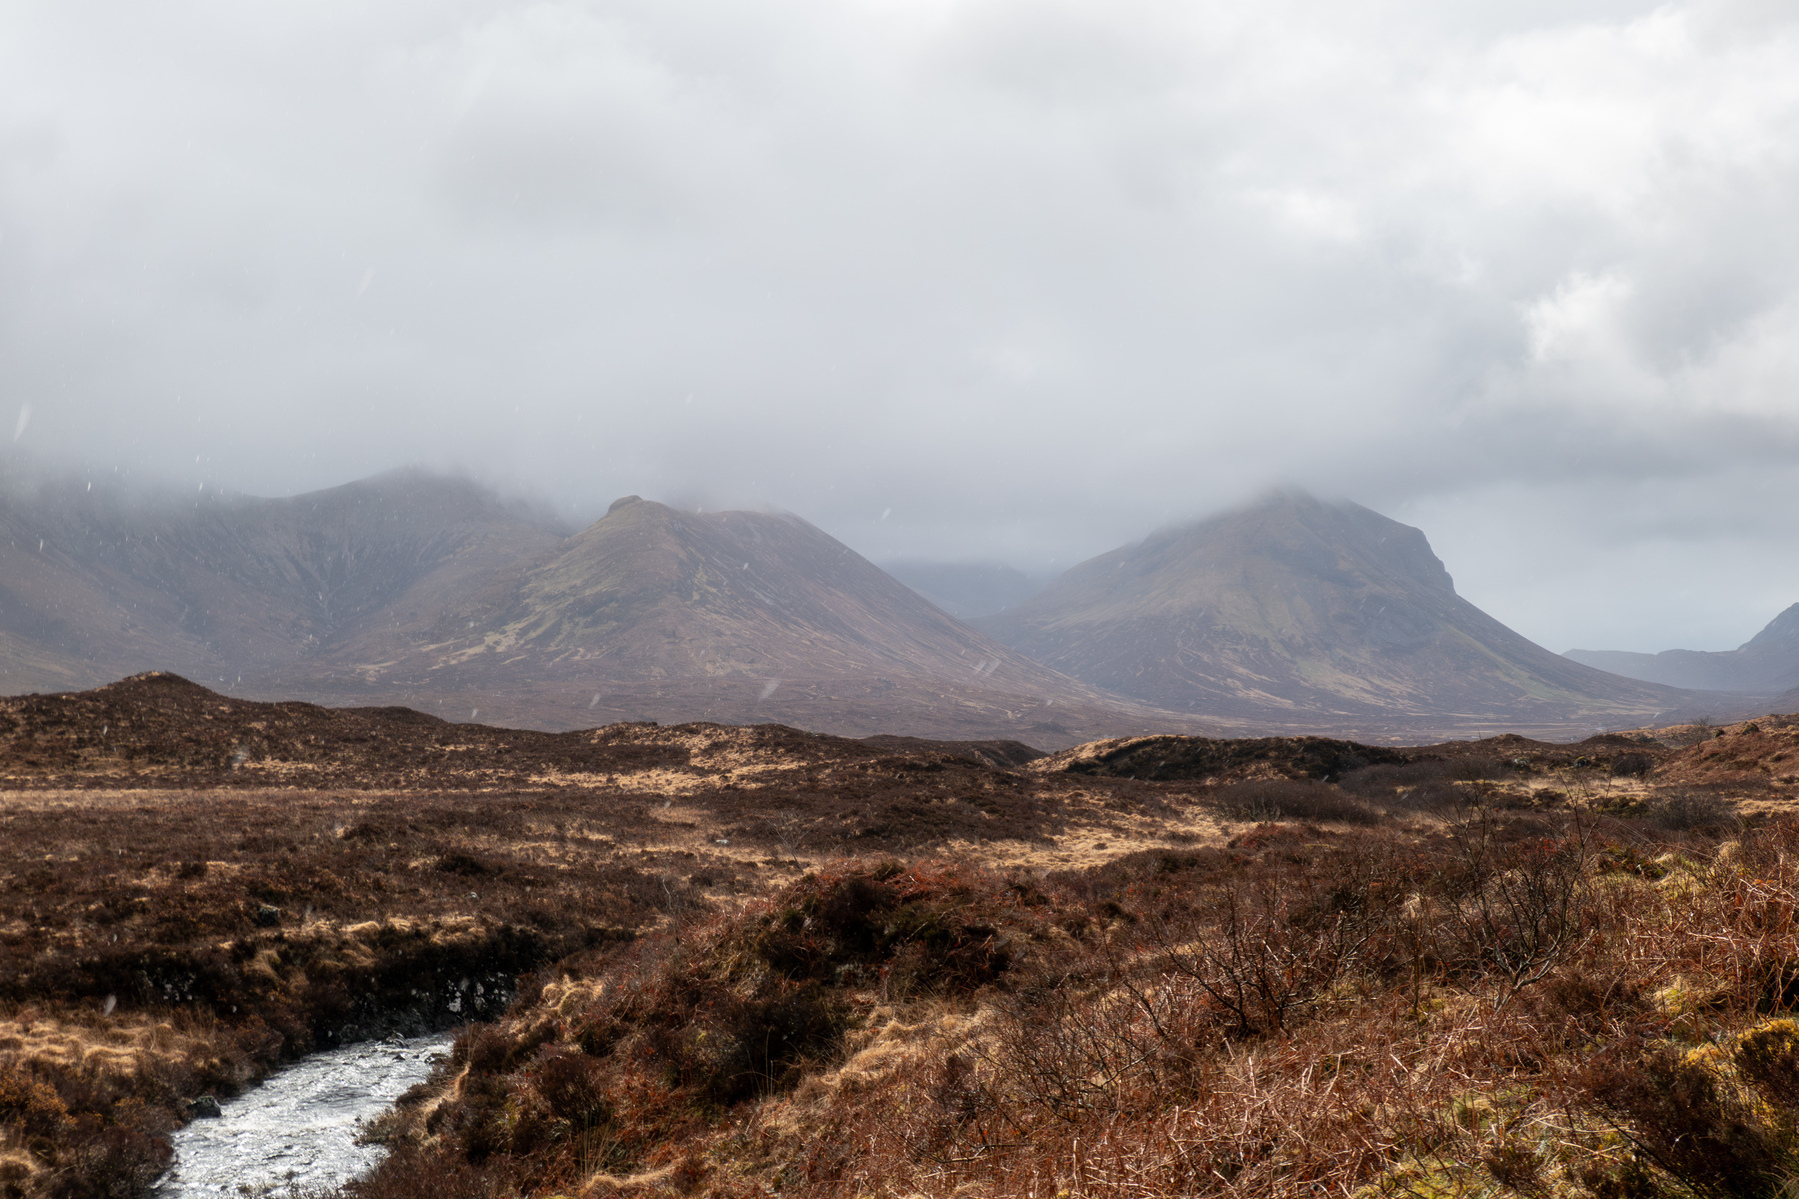 The Scottish Highlands - distant mountains covered in fog, a stream flowing through a field.